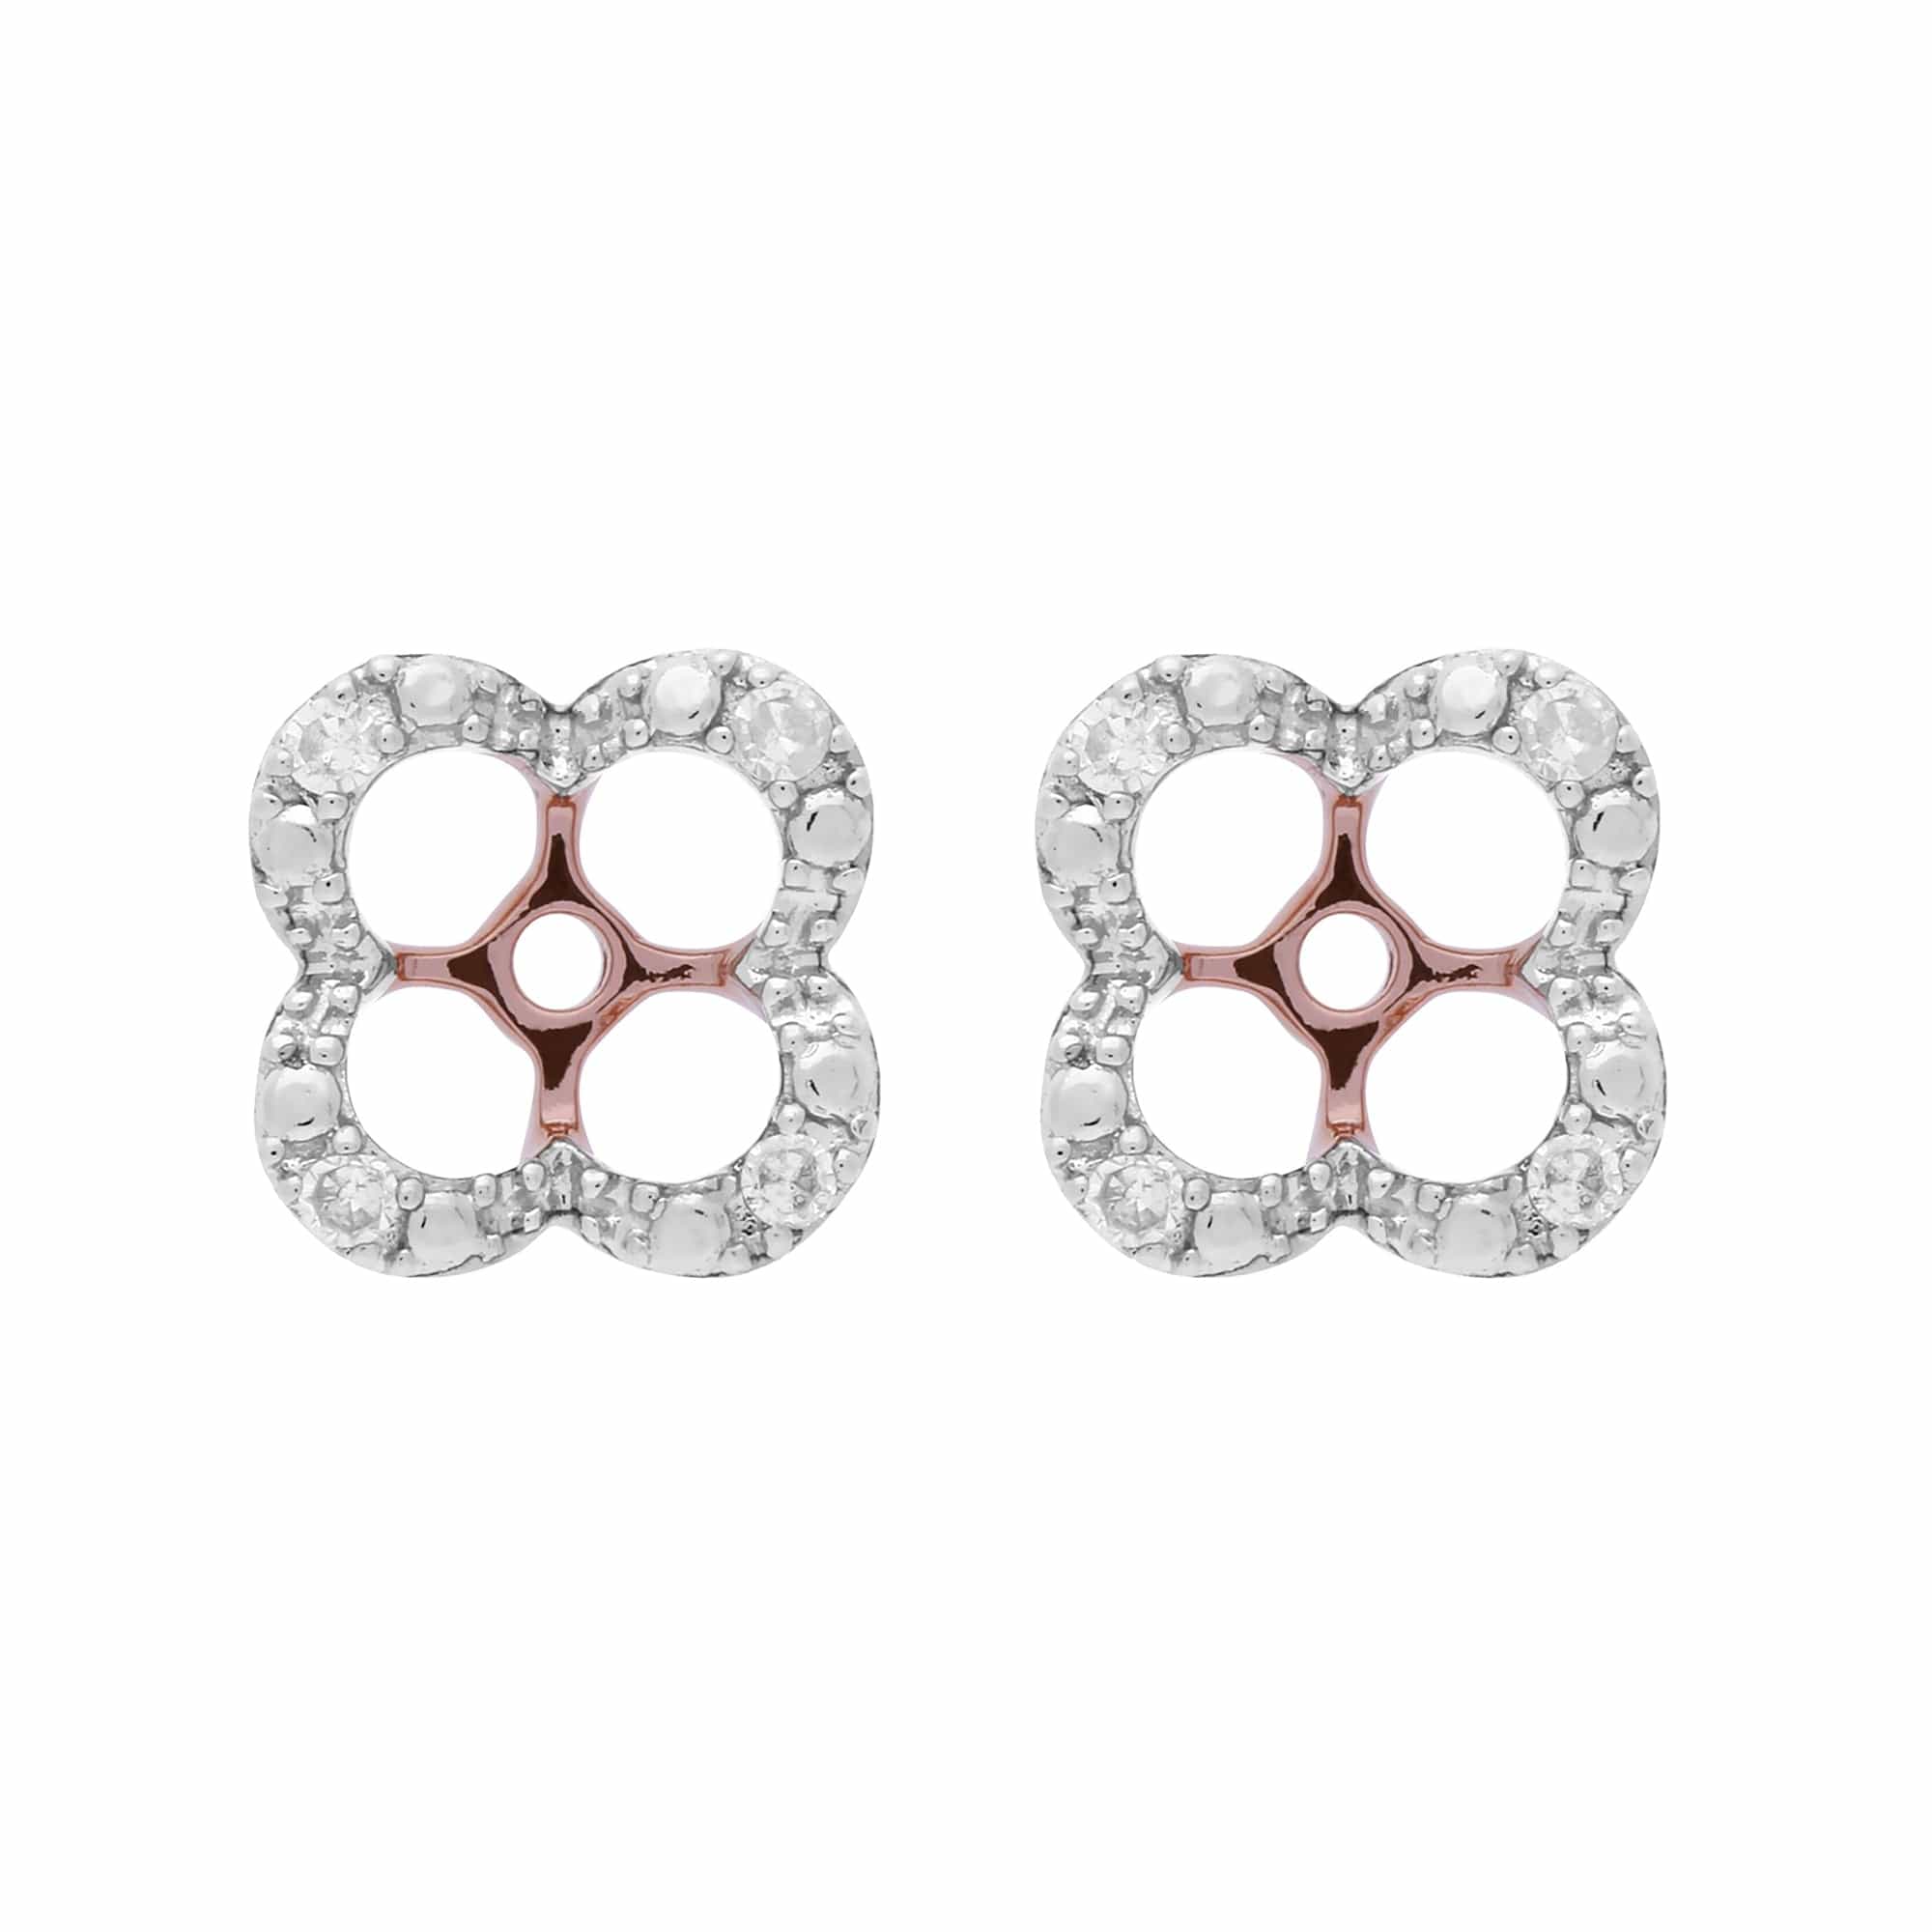 Classic Round Amethyst Stud Earrings with Detachable Diamond Flower Jacket in 9ct Rose Gold - Gemondo